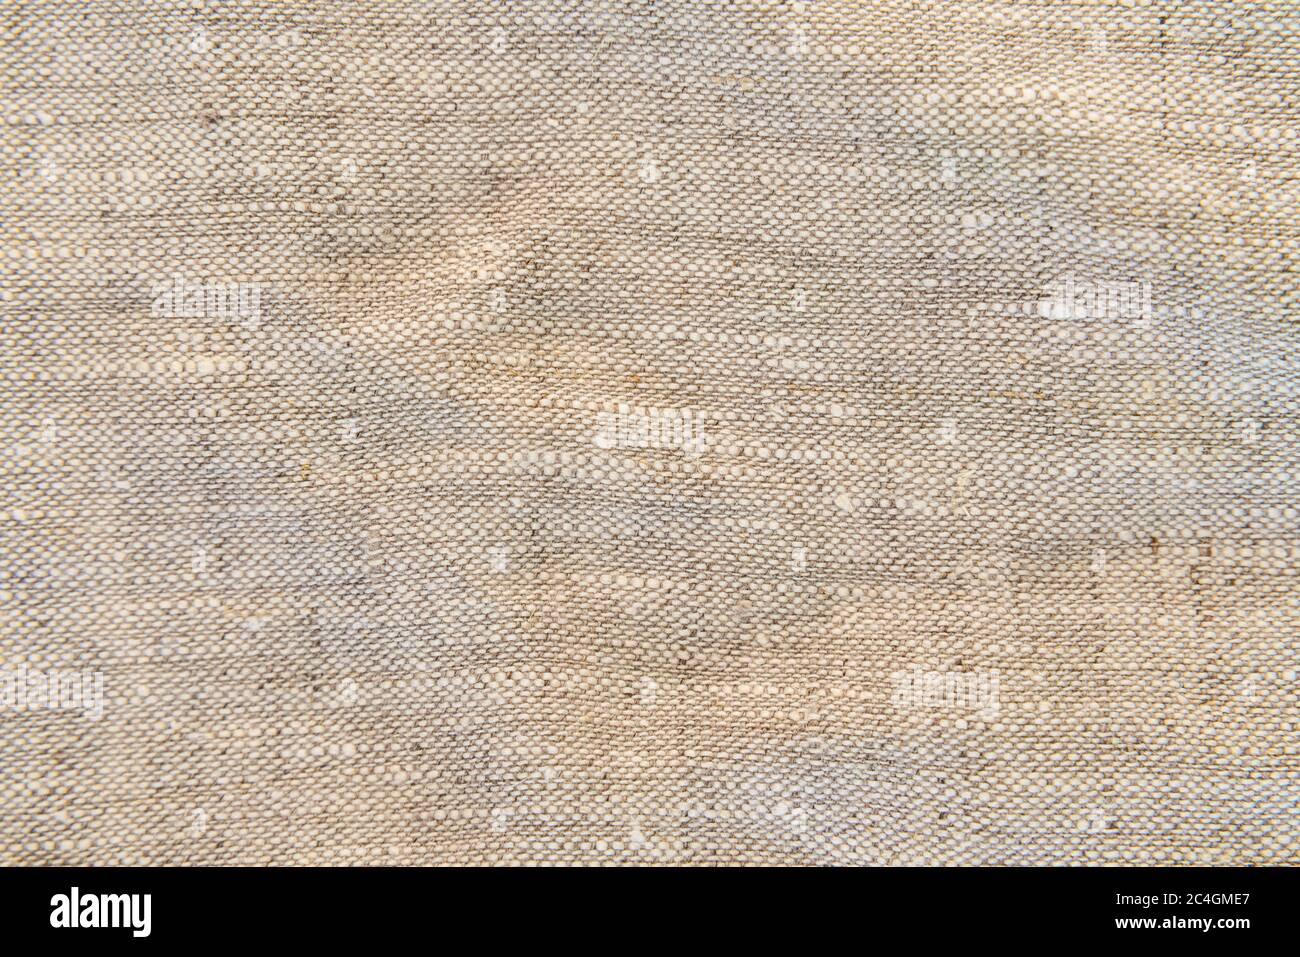 light natural linen texture for the background. natural fabric linen texture for design. sackcloth textured. White Canvas for Background. Image has Stock Photo